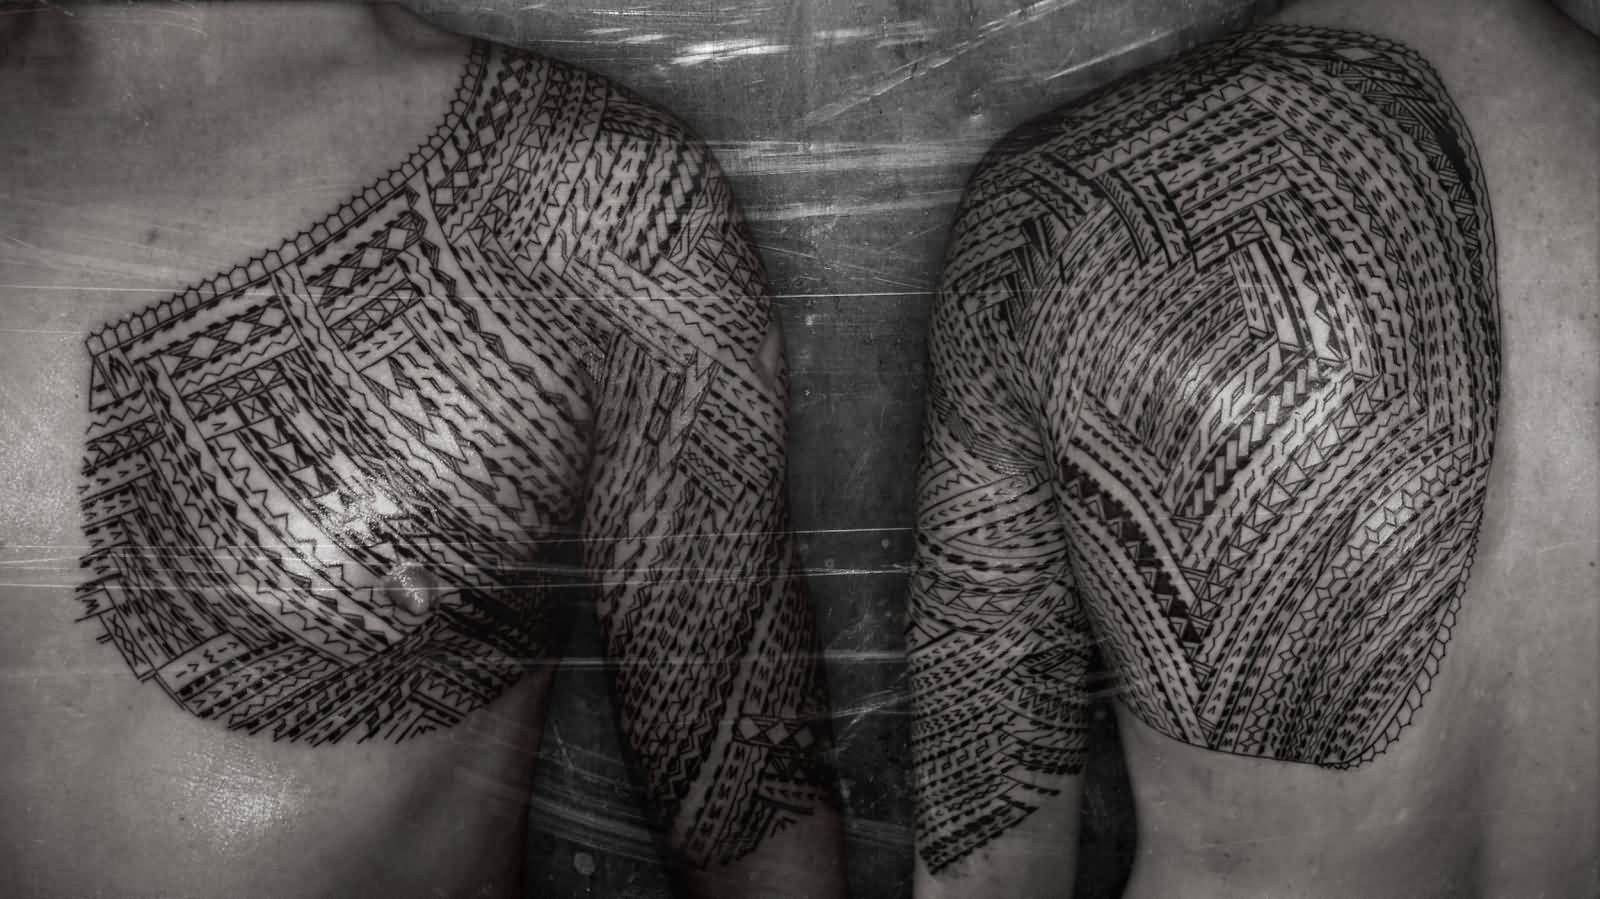 Samoan Tribal Tattoo On Shoulder And Chest